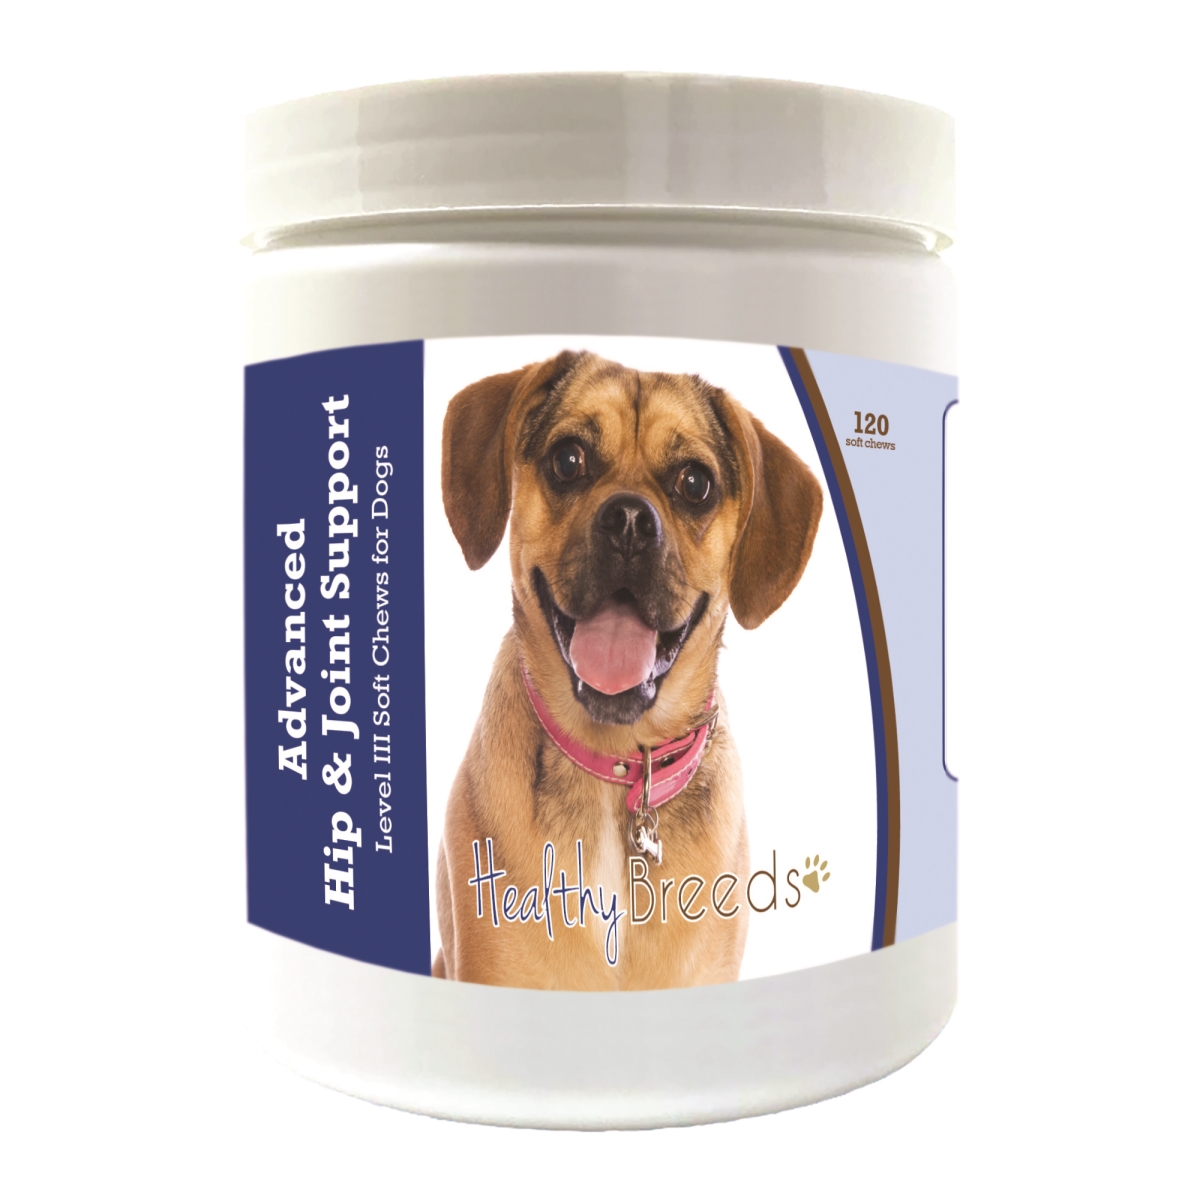 Picture of Healthy Breeds 192959899016 Puggle Advanced Hip & Joint Support Level III Soft Chews for Dogs